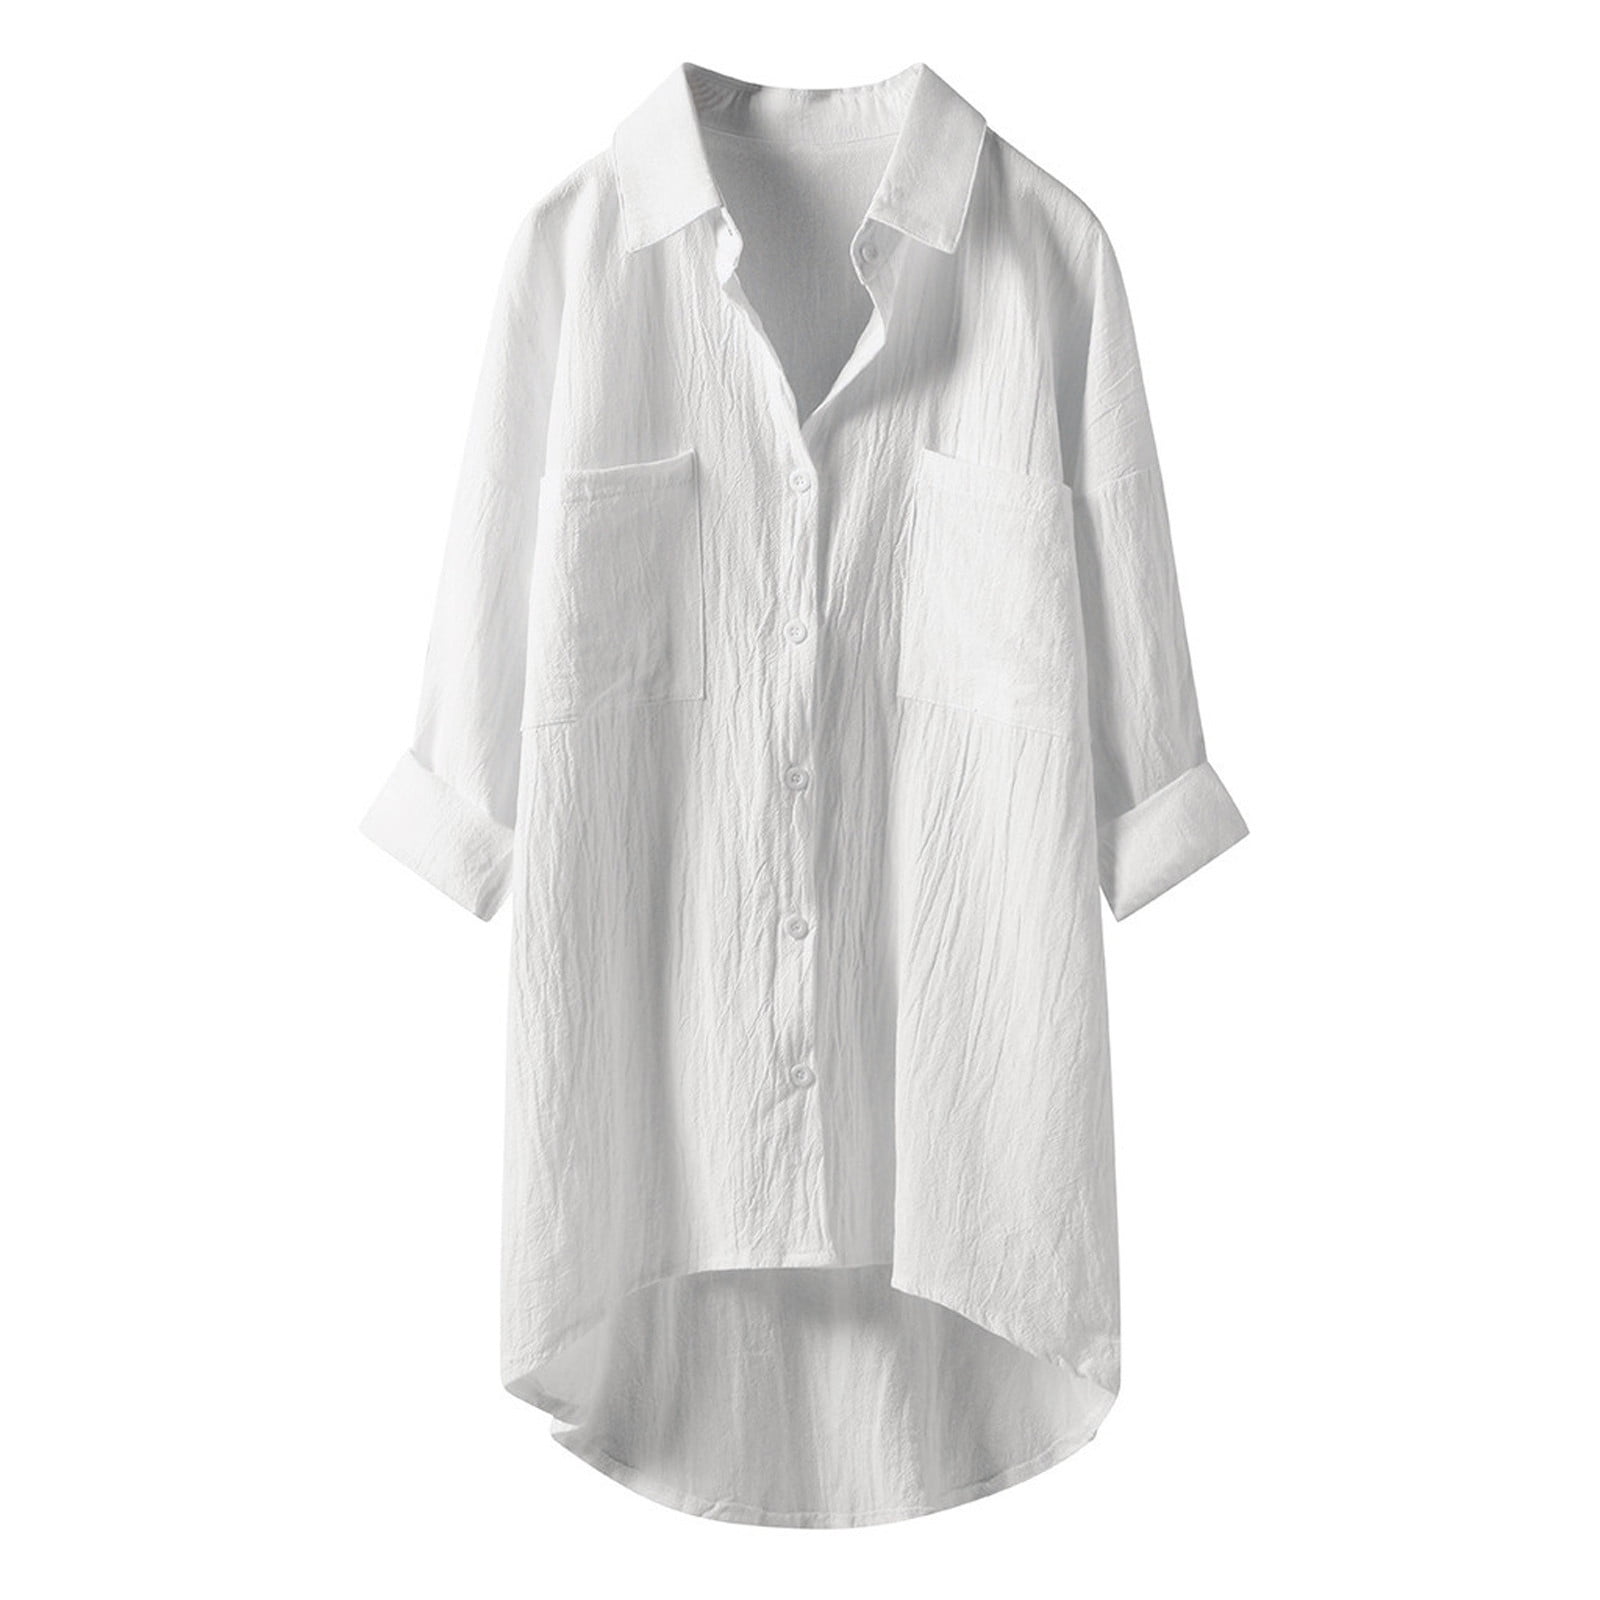 Kcodviy Women's Casual Linen Blouses Tops Long Sleeve Button Down ...